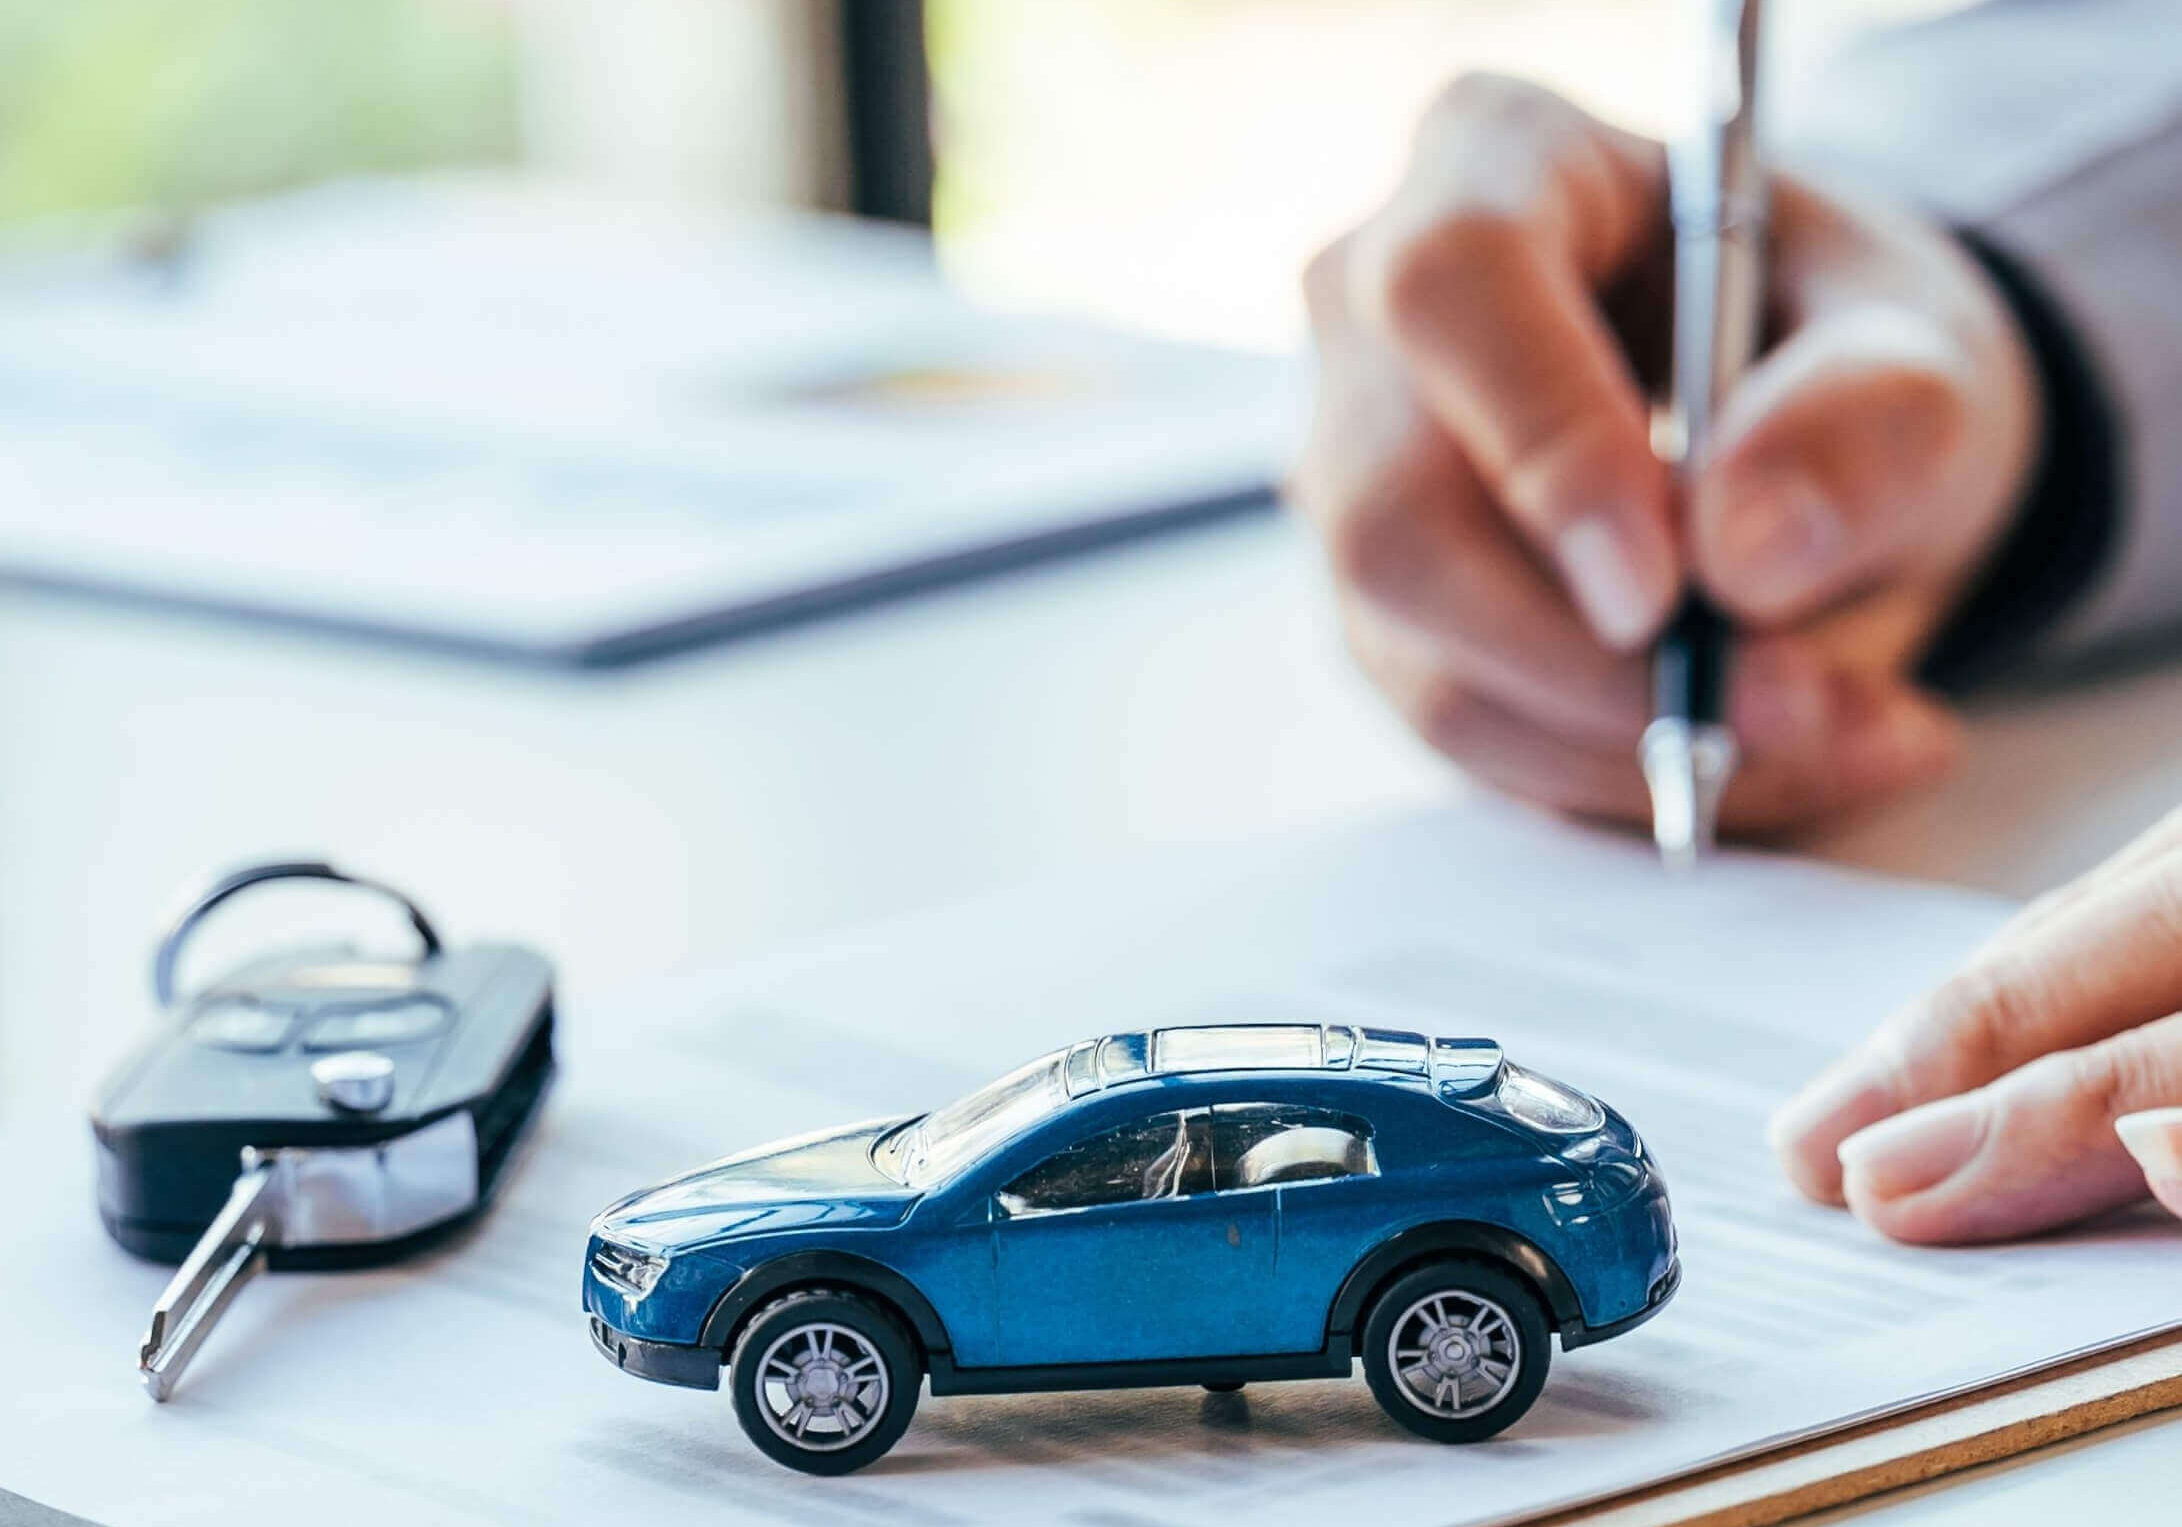 auto loan papers being signed with car keys and toy car